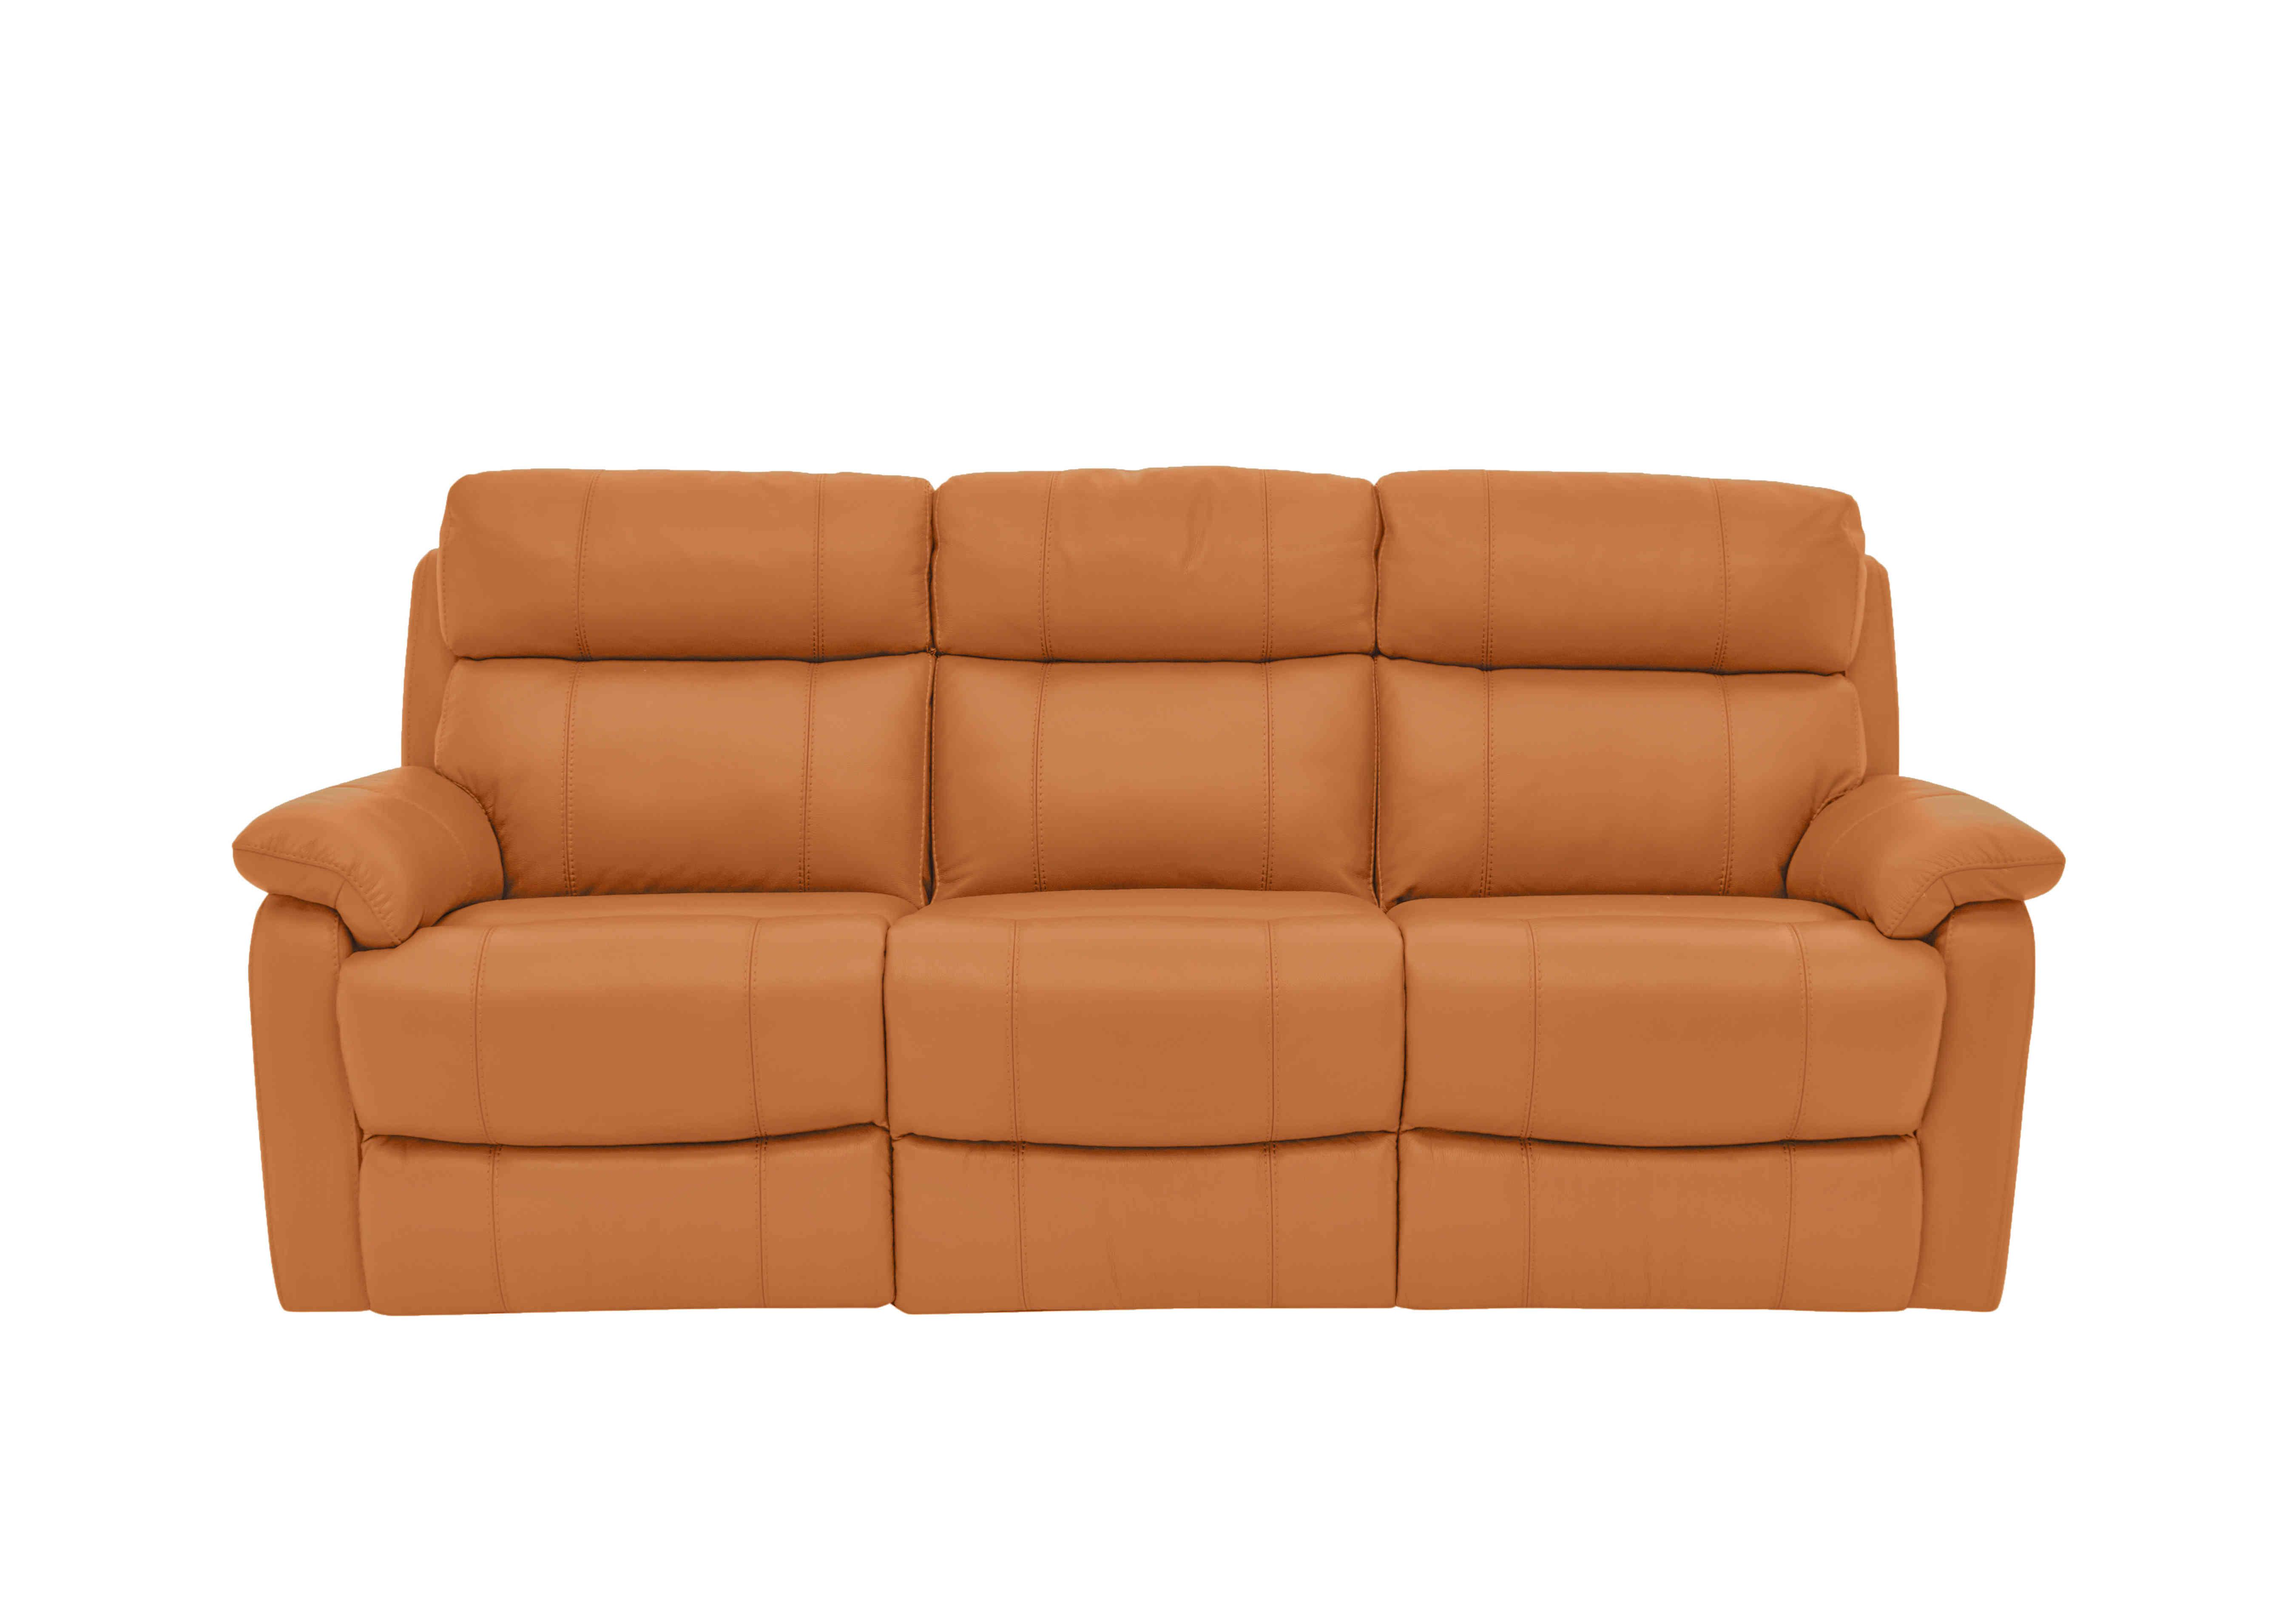 Relax Station Komodo 3 Seater Leather Sofa with Power Headrests and Cup Holders in Bv-335e Honey Yellow on Furniture Village